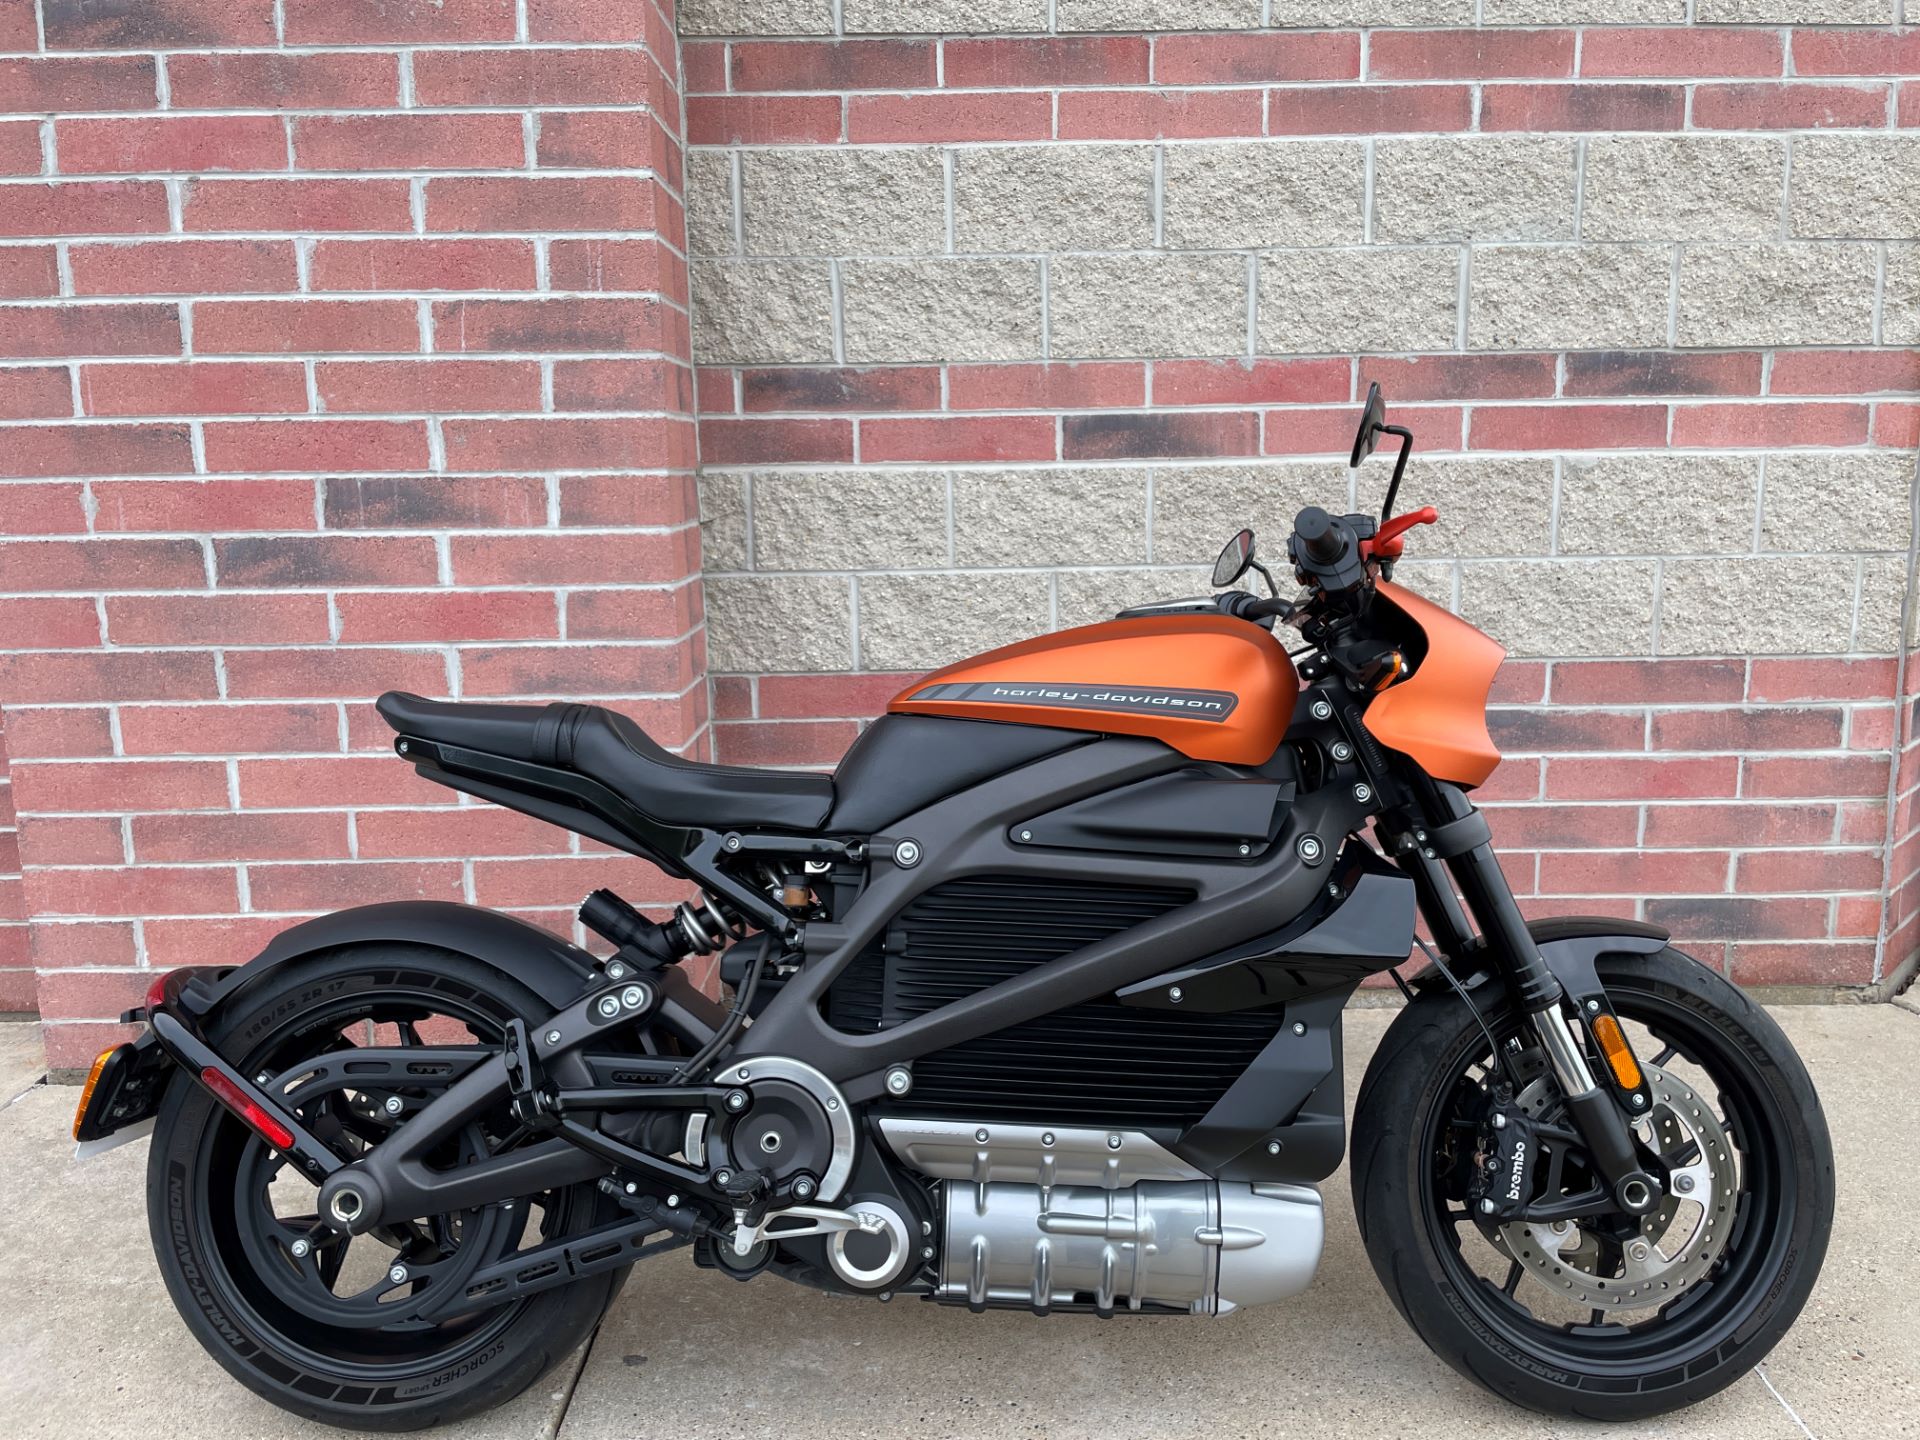 Used 2020 Harley Davidson Livewire Motorcycles For Sale Near Milwaukee Wisconsin Indian Motorcycle Of Metro Milwaukee